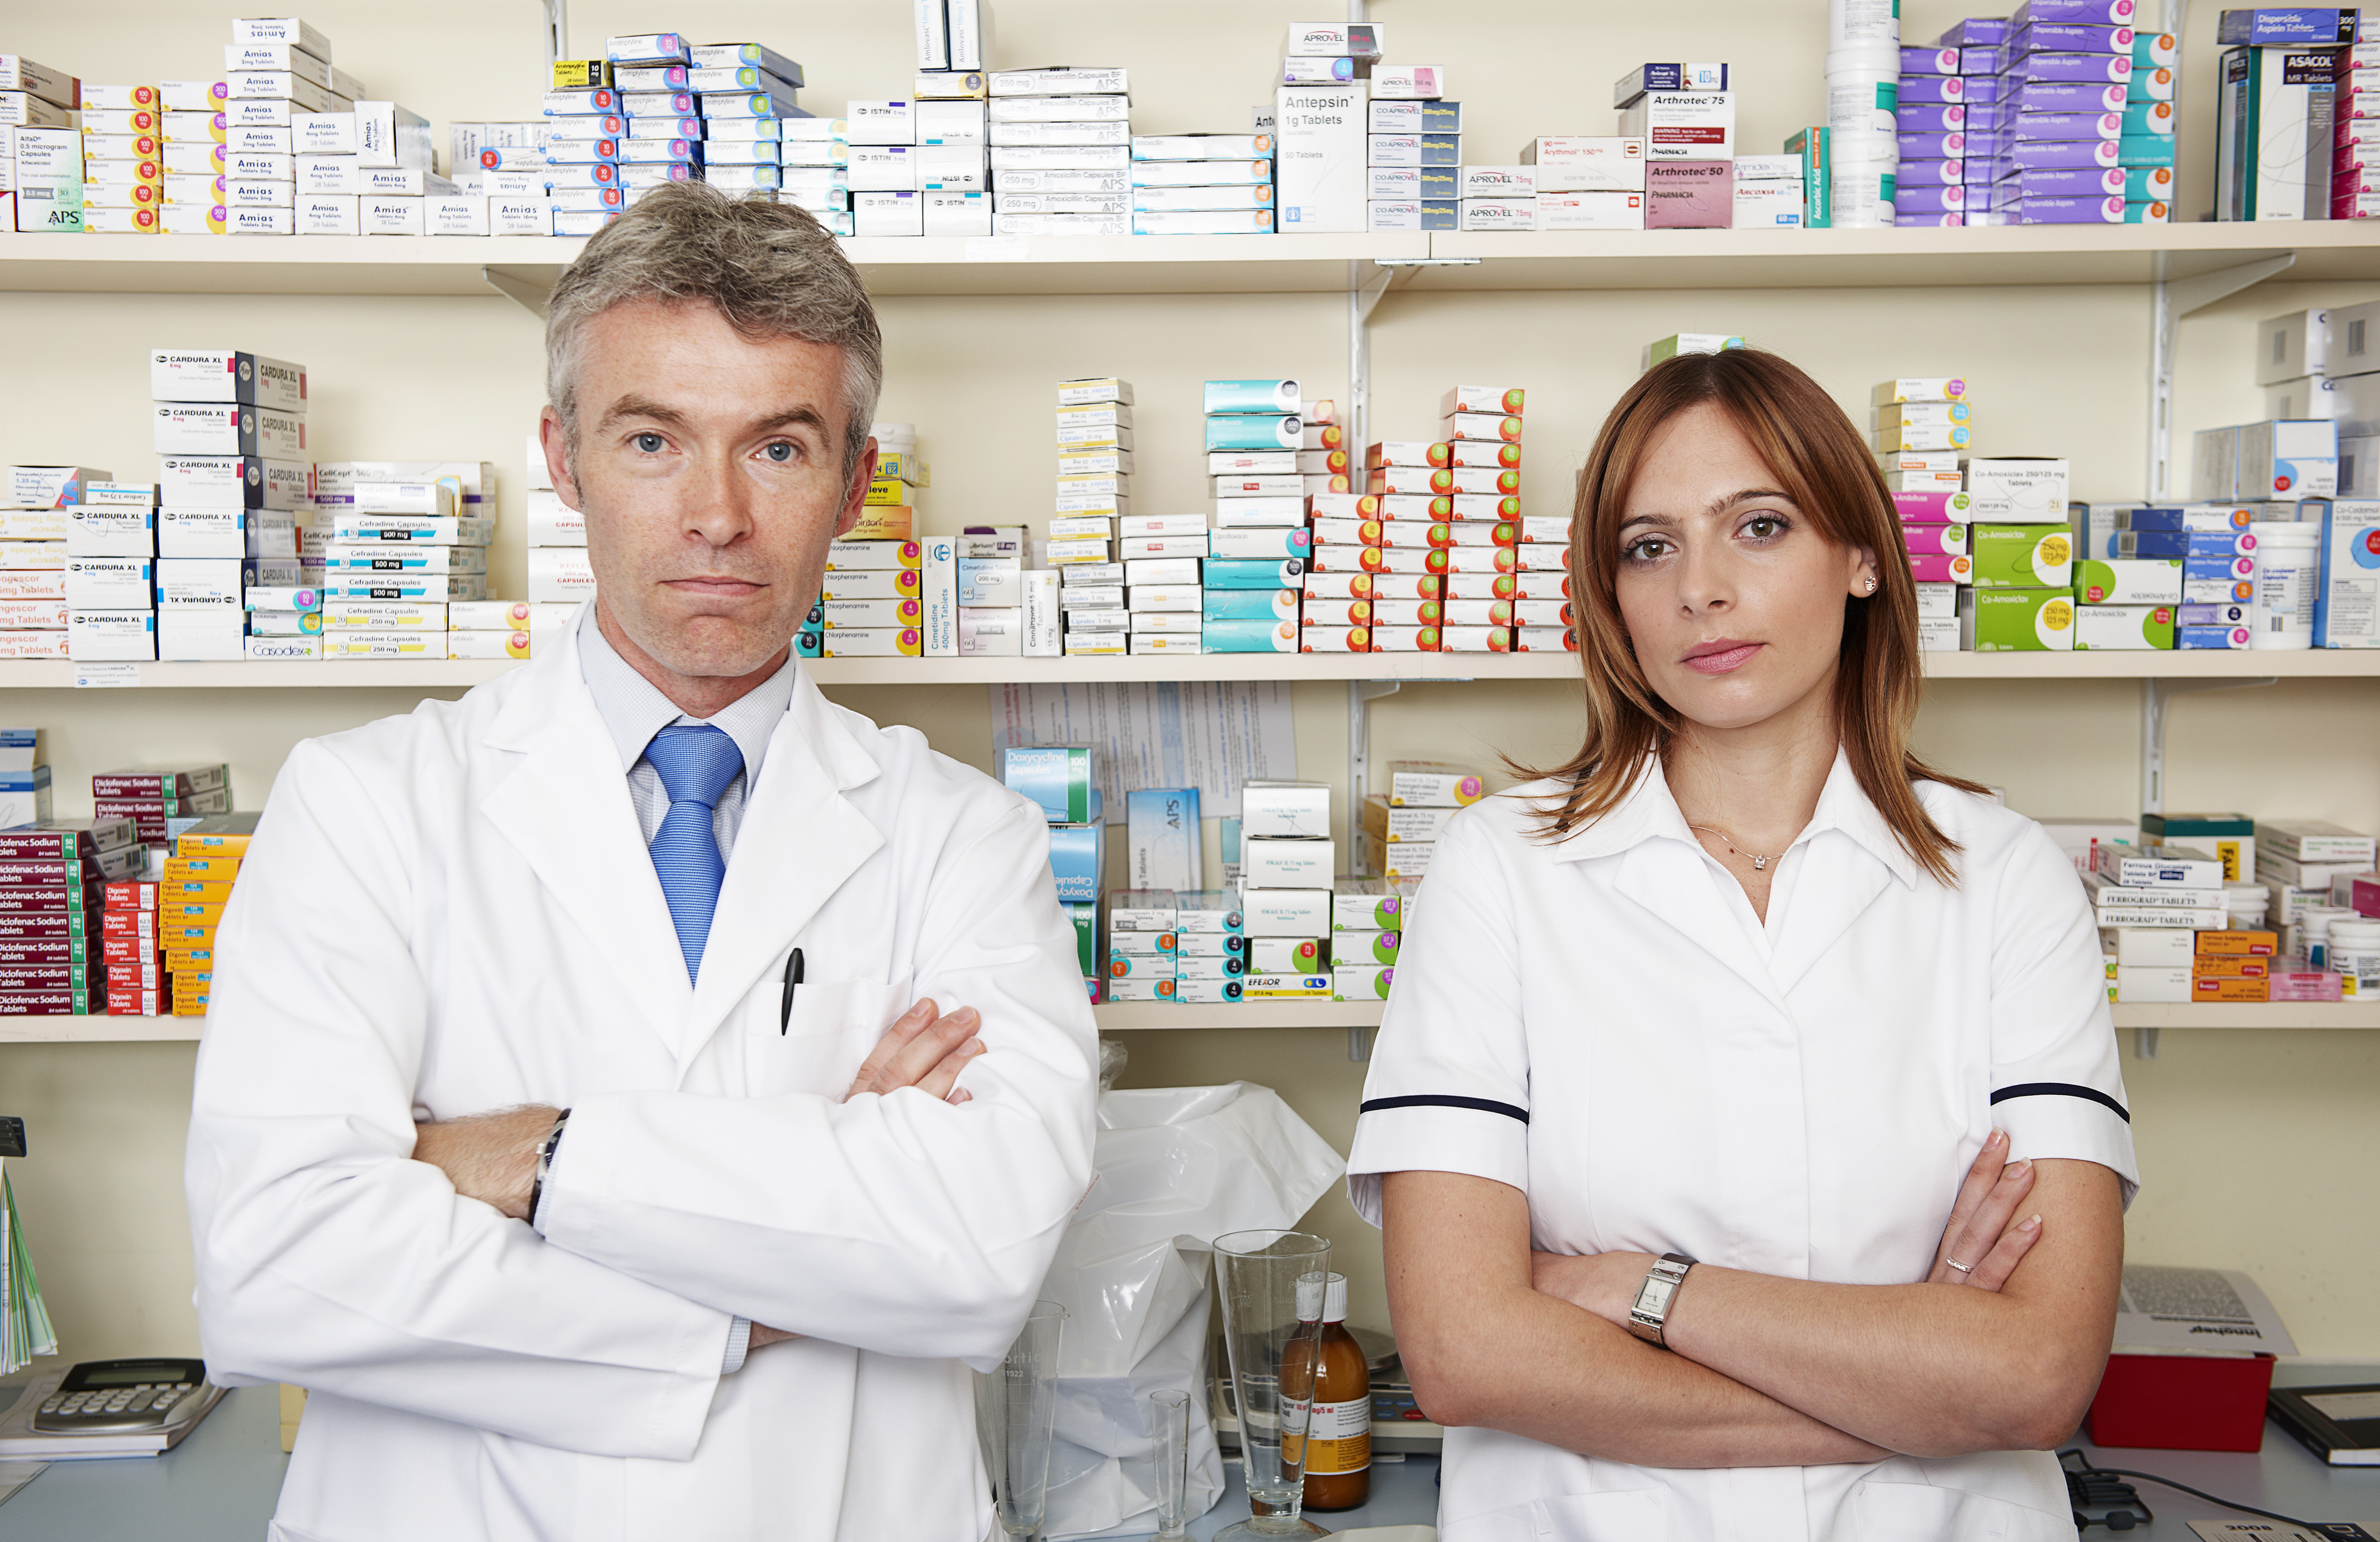 Two pharmacists with their arms crossed as they stand in front of shelves with medicine